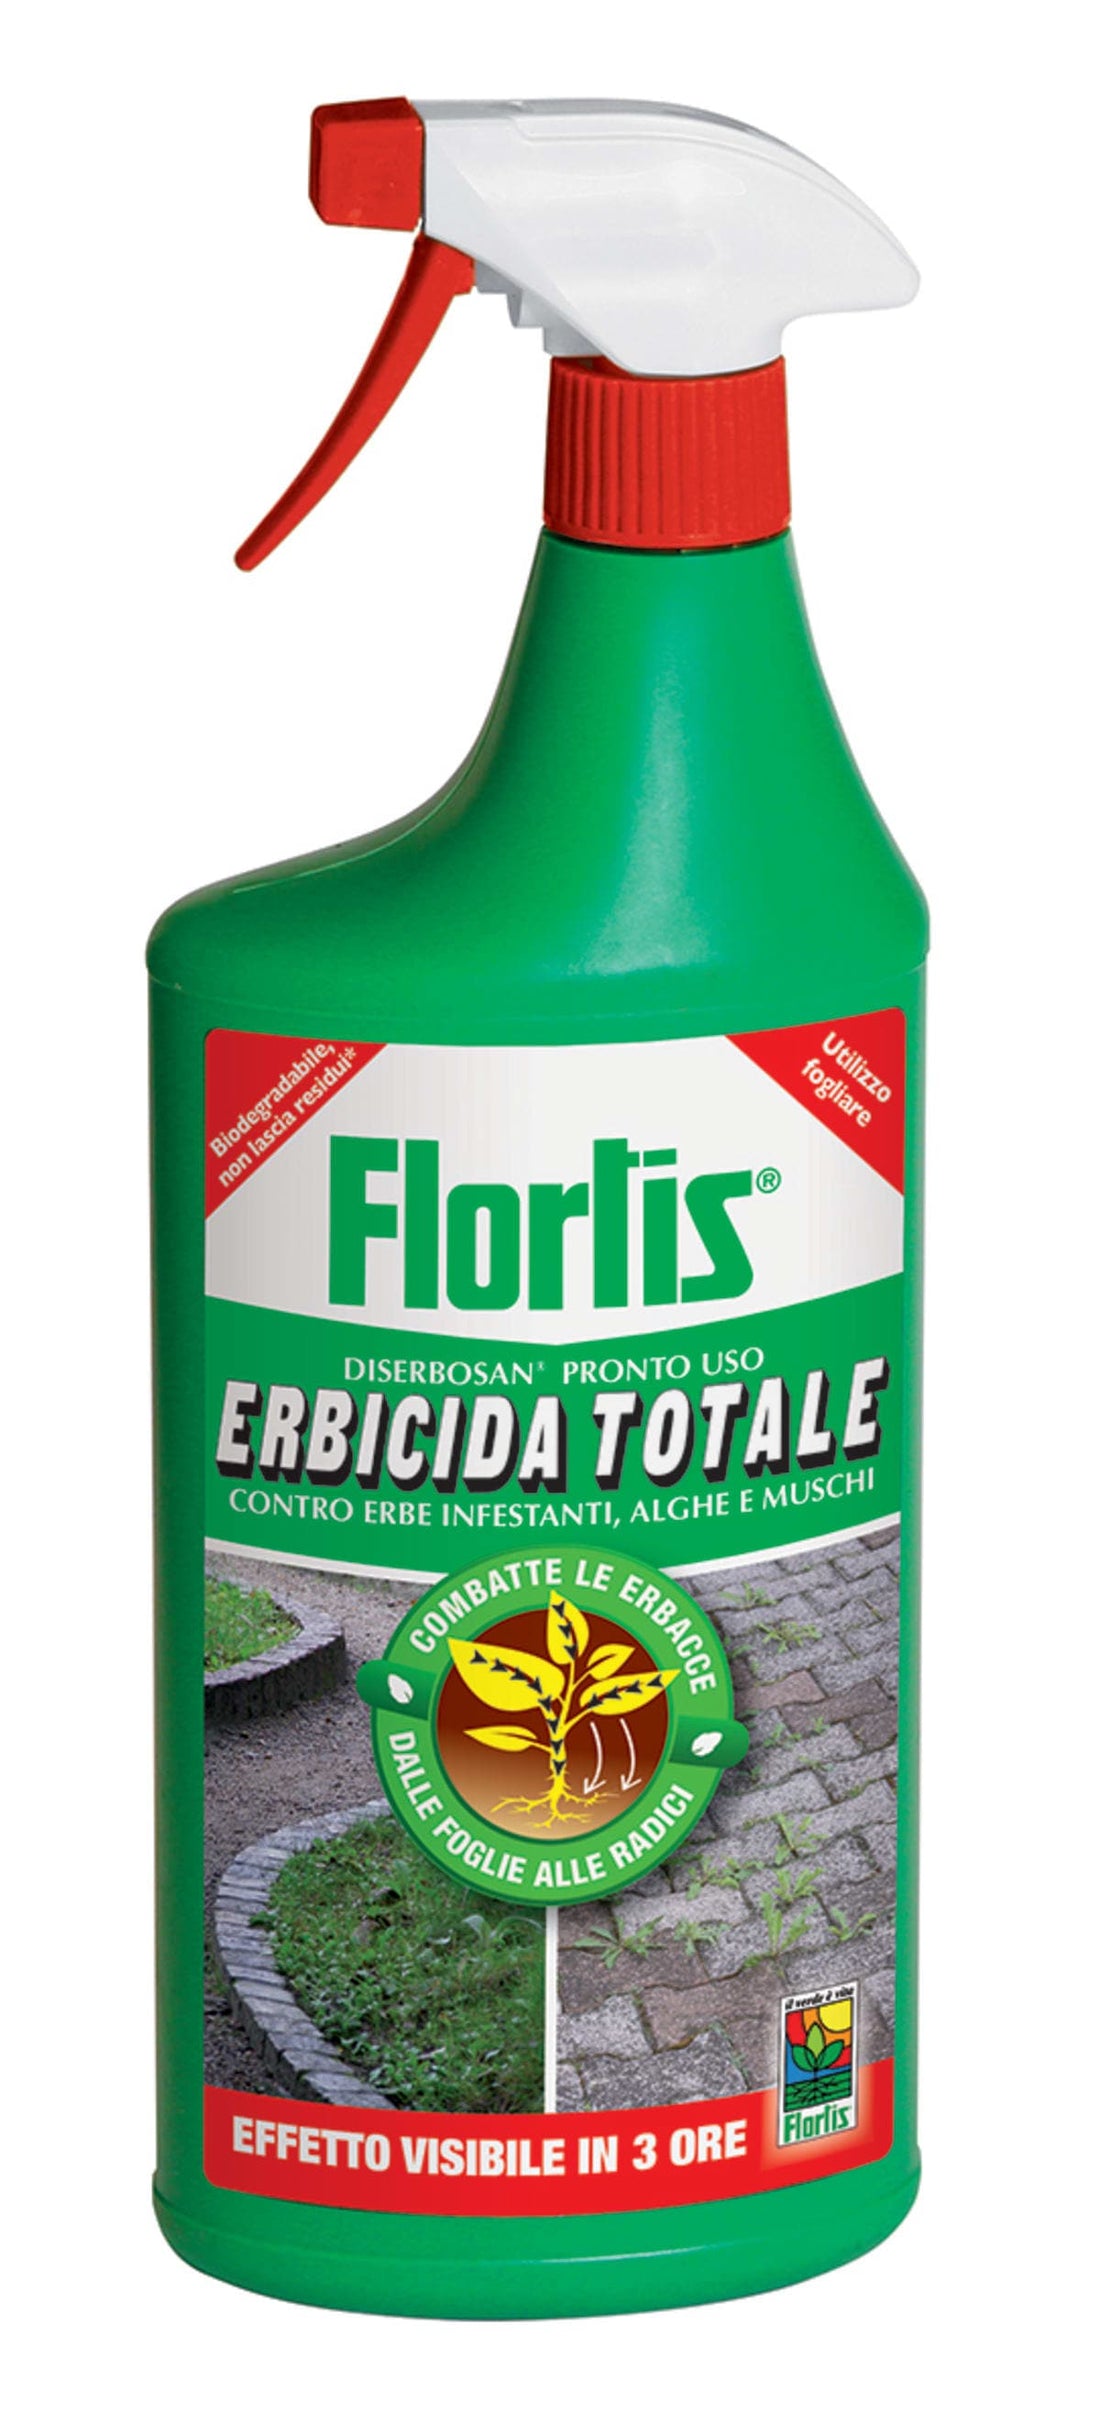 HERBICIDE HERBICIDE READY FOR USE 1000 ML - best price from Maltashopper.com BR510007841